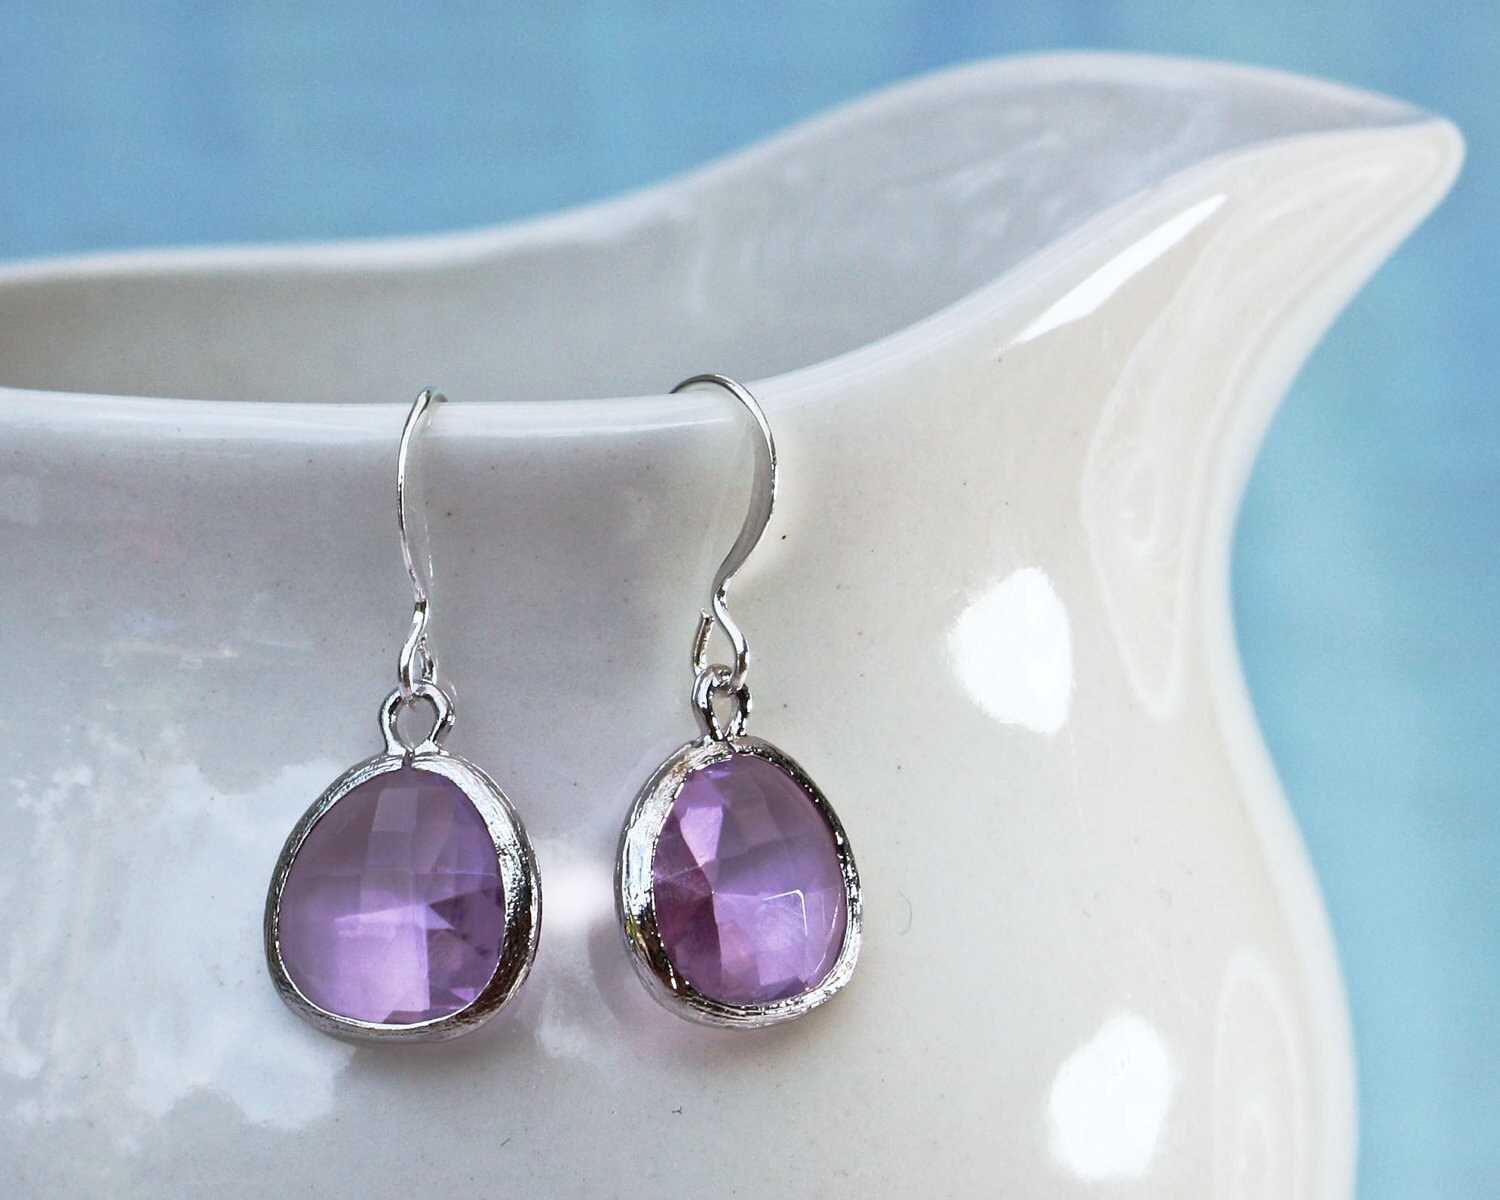 purple earrings with silver bezel setting. Framed and faceted | Etsy